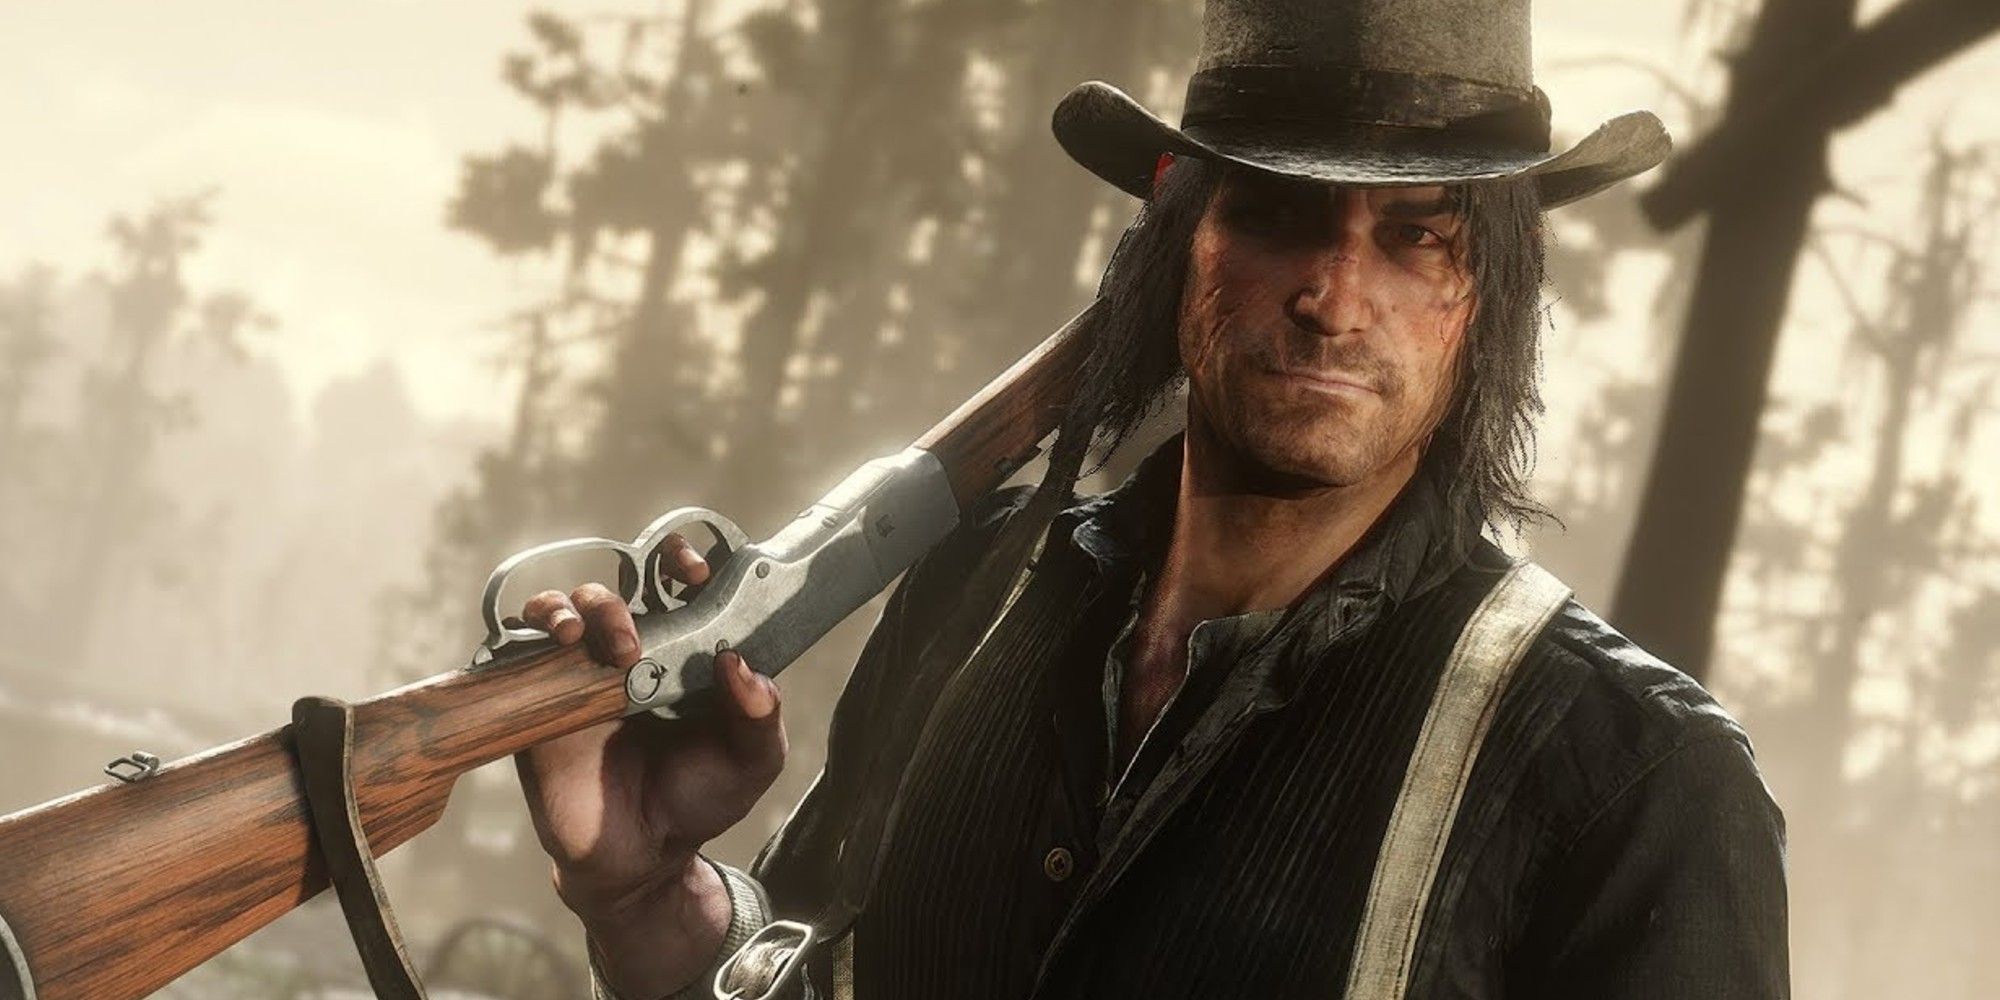 5 Things Red Dead Redemption 2 Does Better Than The First Game (& 5 Ways The Original Is Superior)